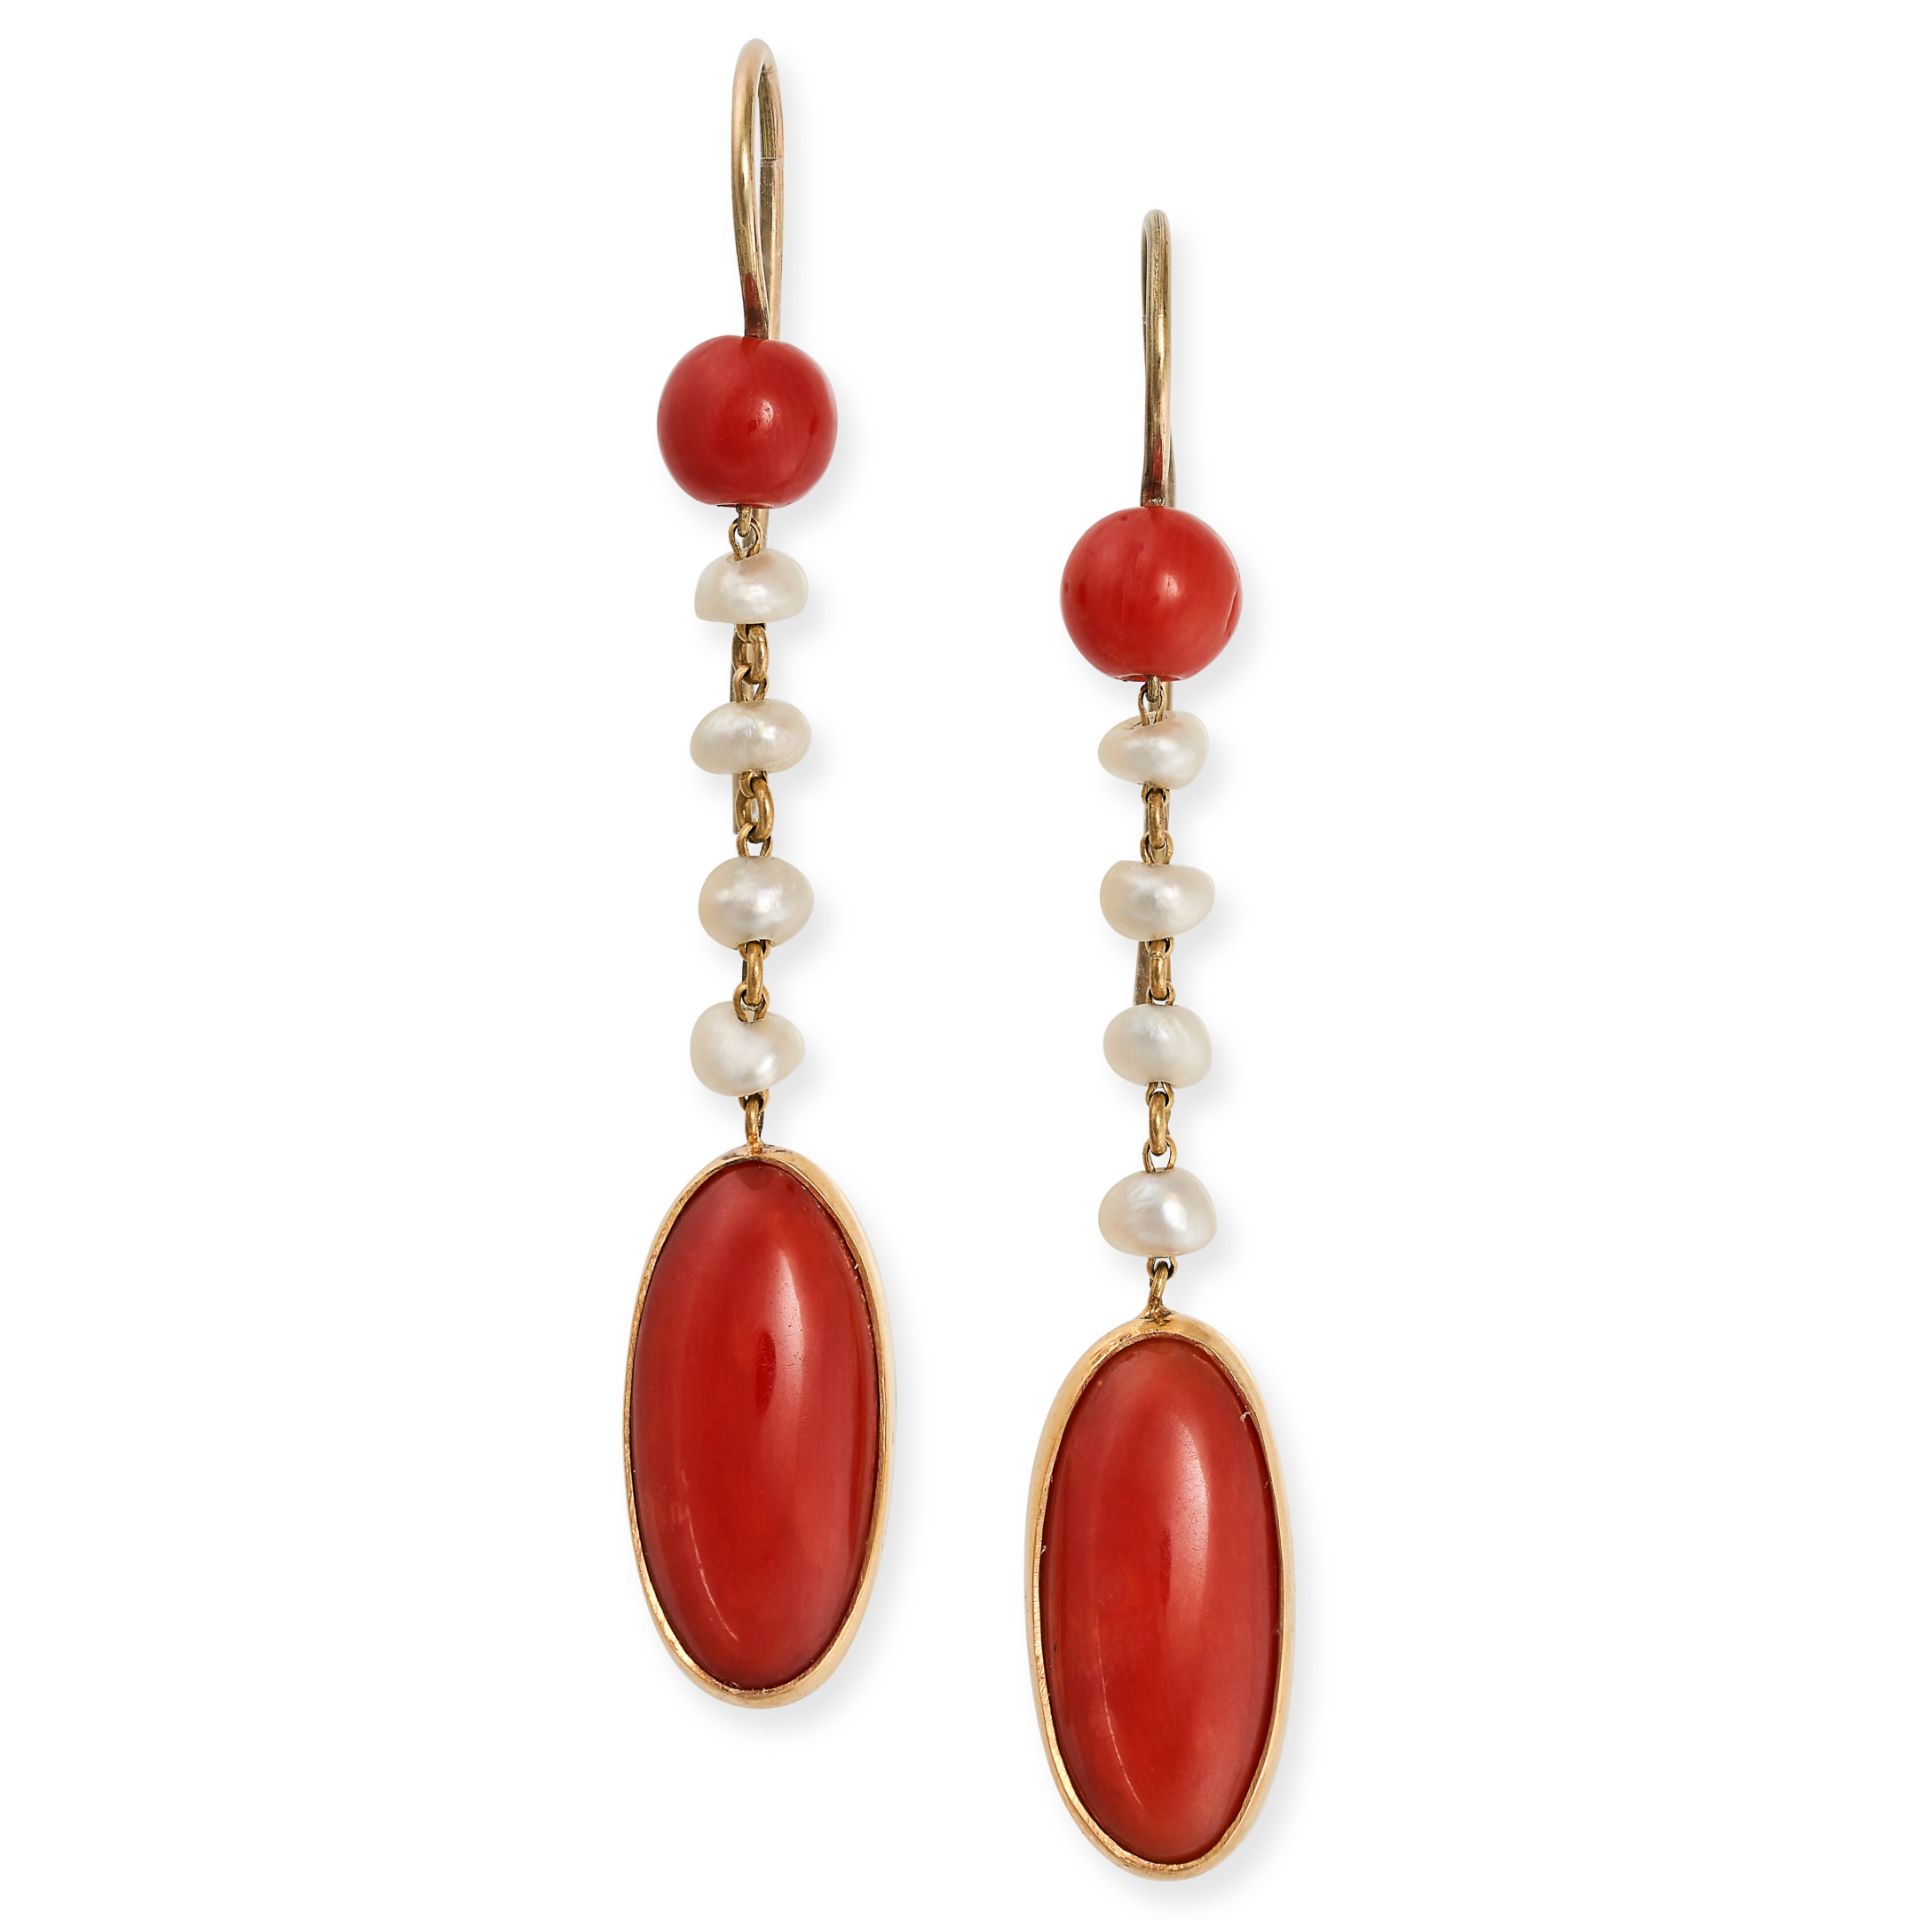 A PAIR OF CORAL AND PEARL DROP EARRINGS in yellow gold, each set with a polished coral bead suspe...